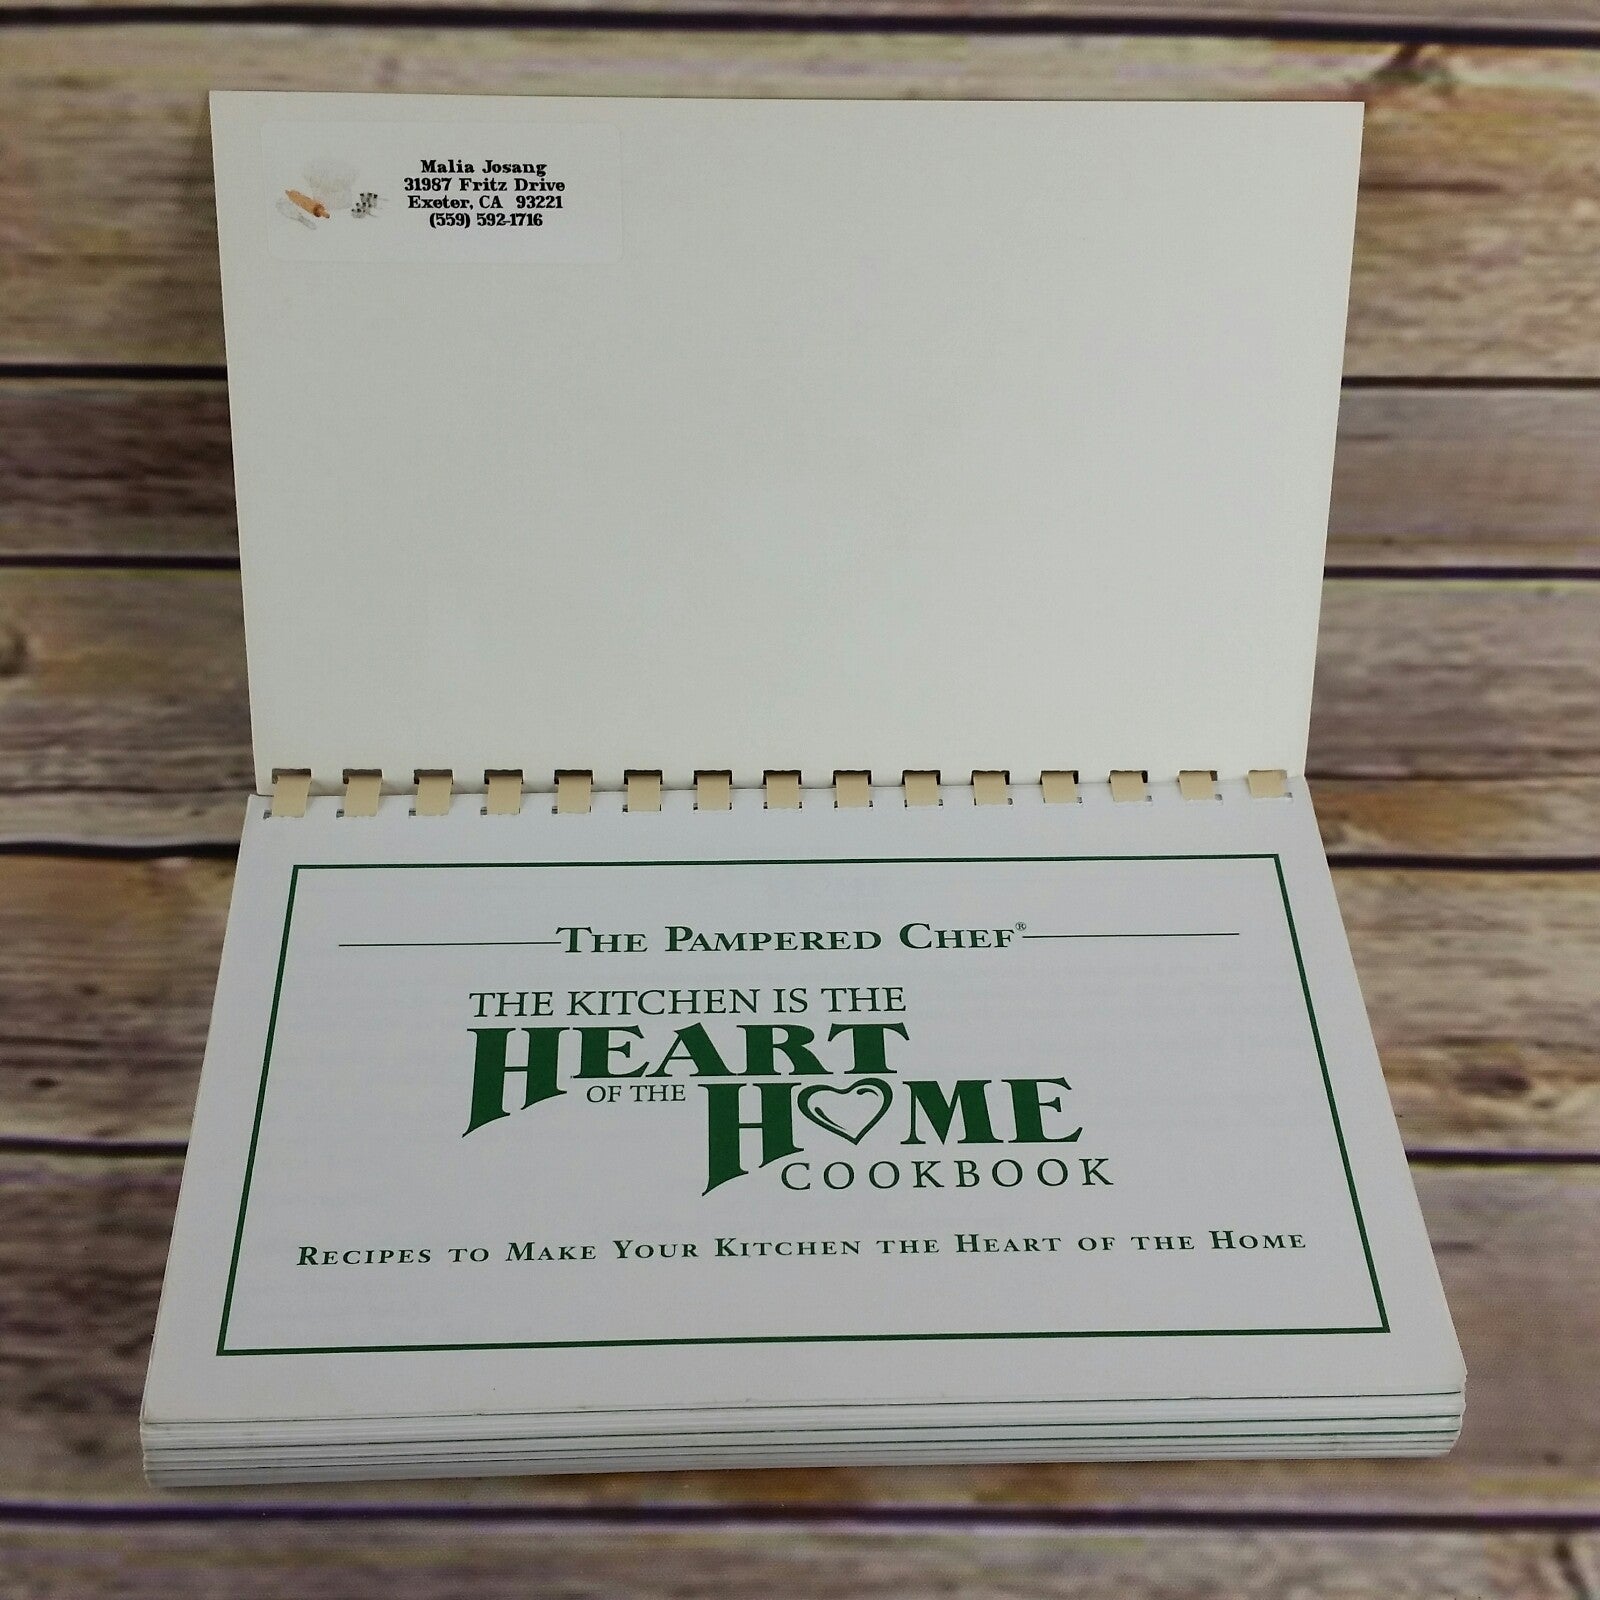 Vintage Cookbook Pampered Chef Kitchen Is the Heart of the Home Recipes 1999 Promo - At Grandma's Table